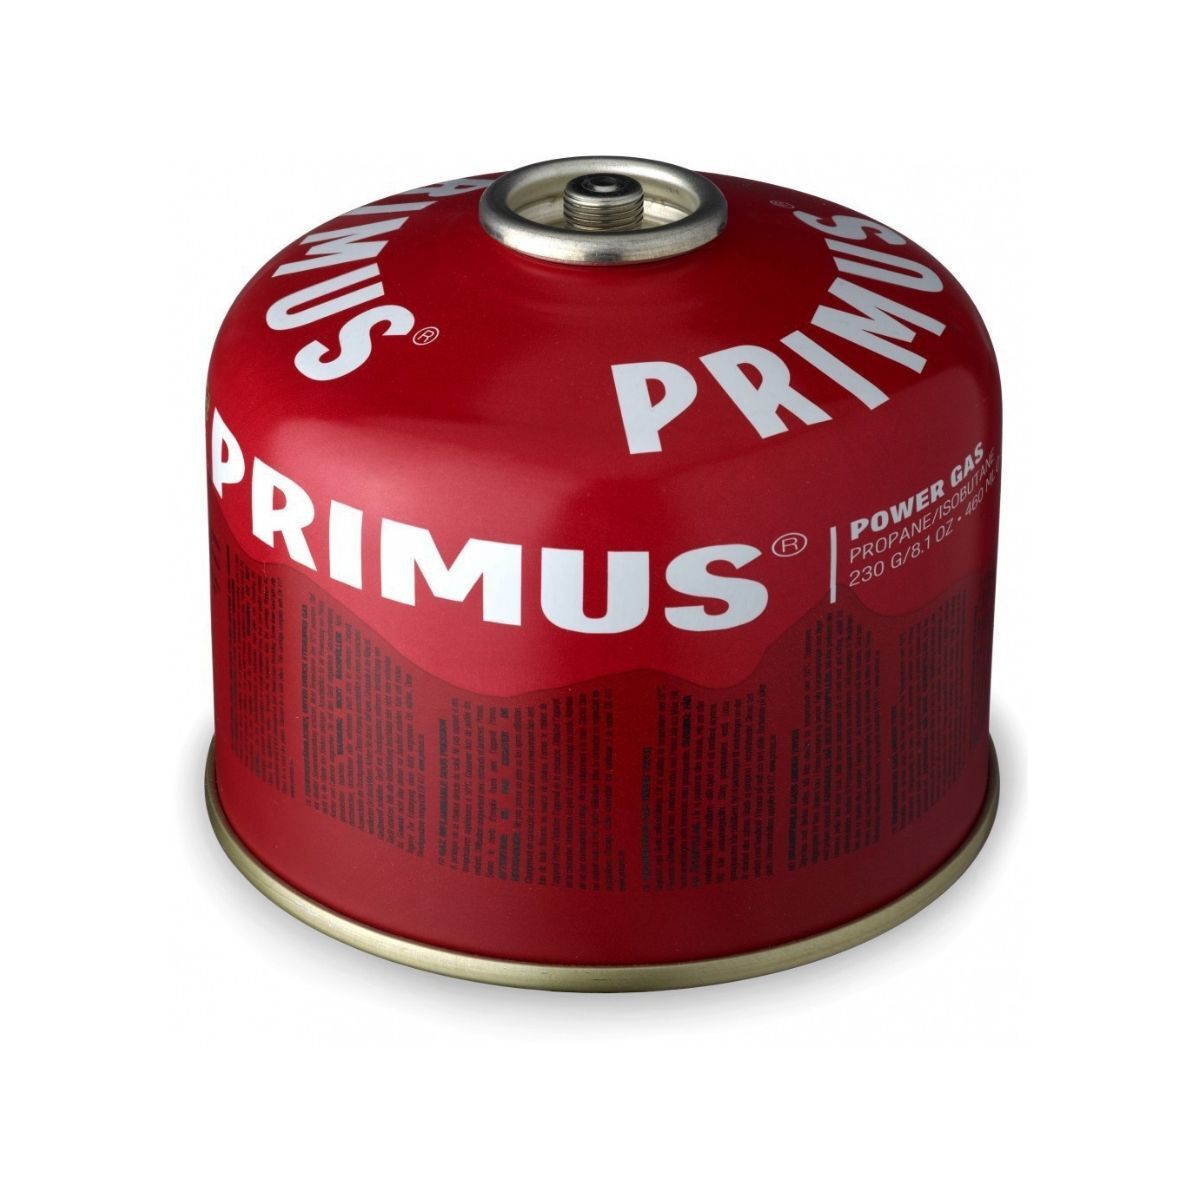 Primus Power Gas 230 g L1 - Gas canister